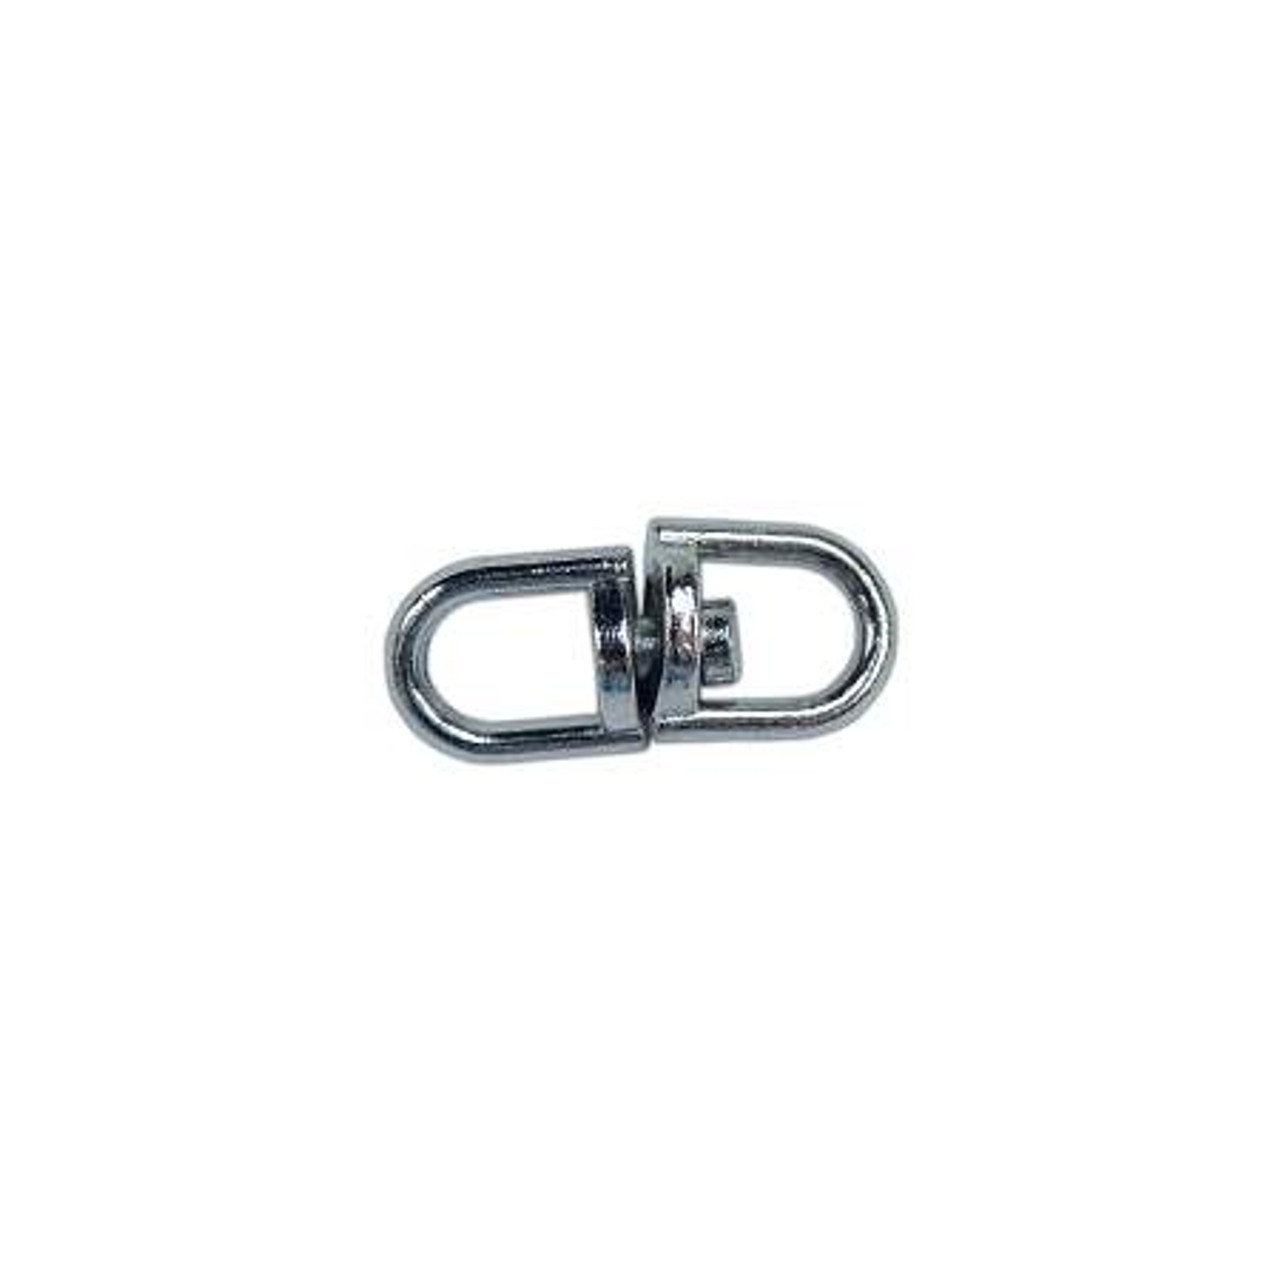 Paracord Planet Silver Swivel Snap Hooks